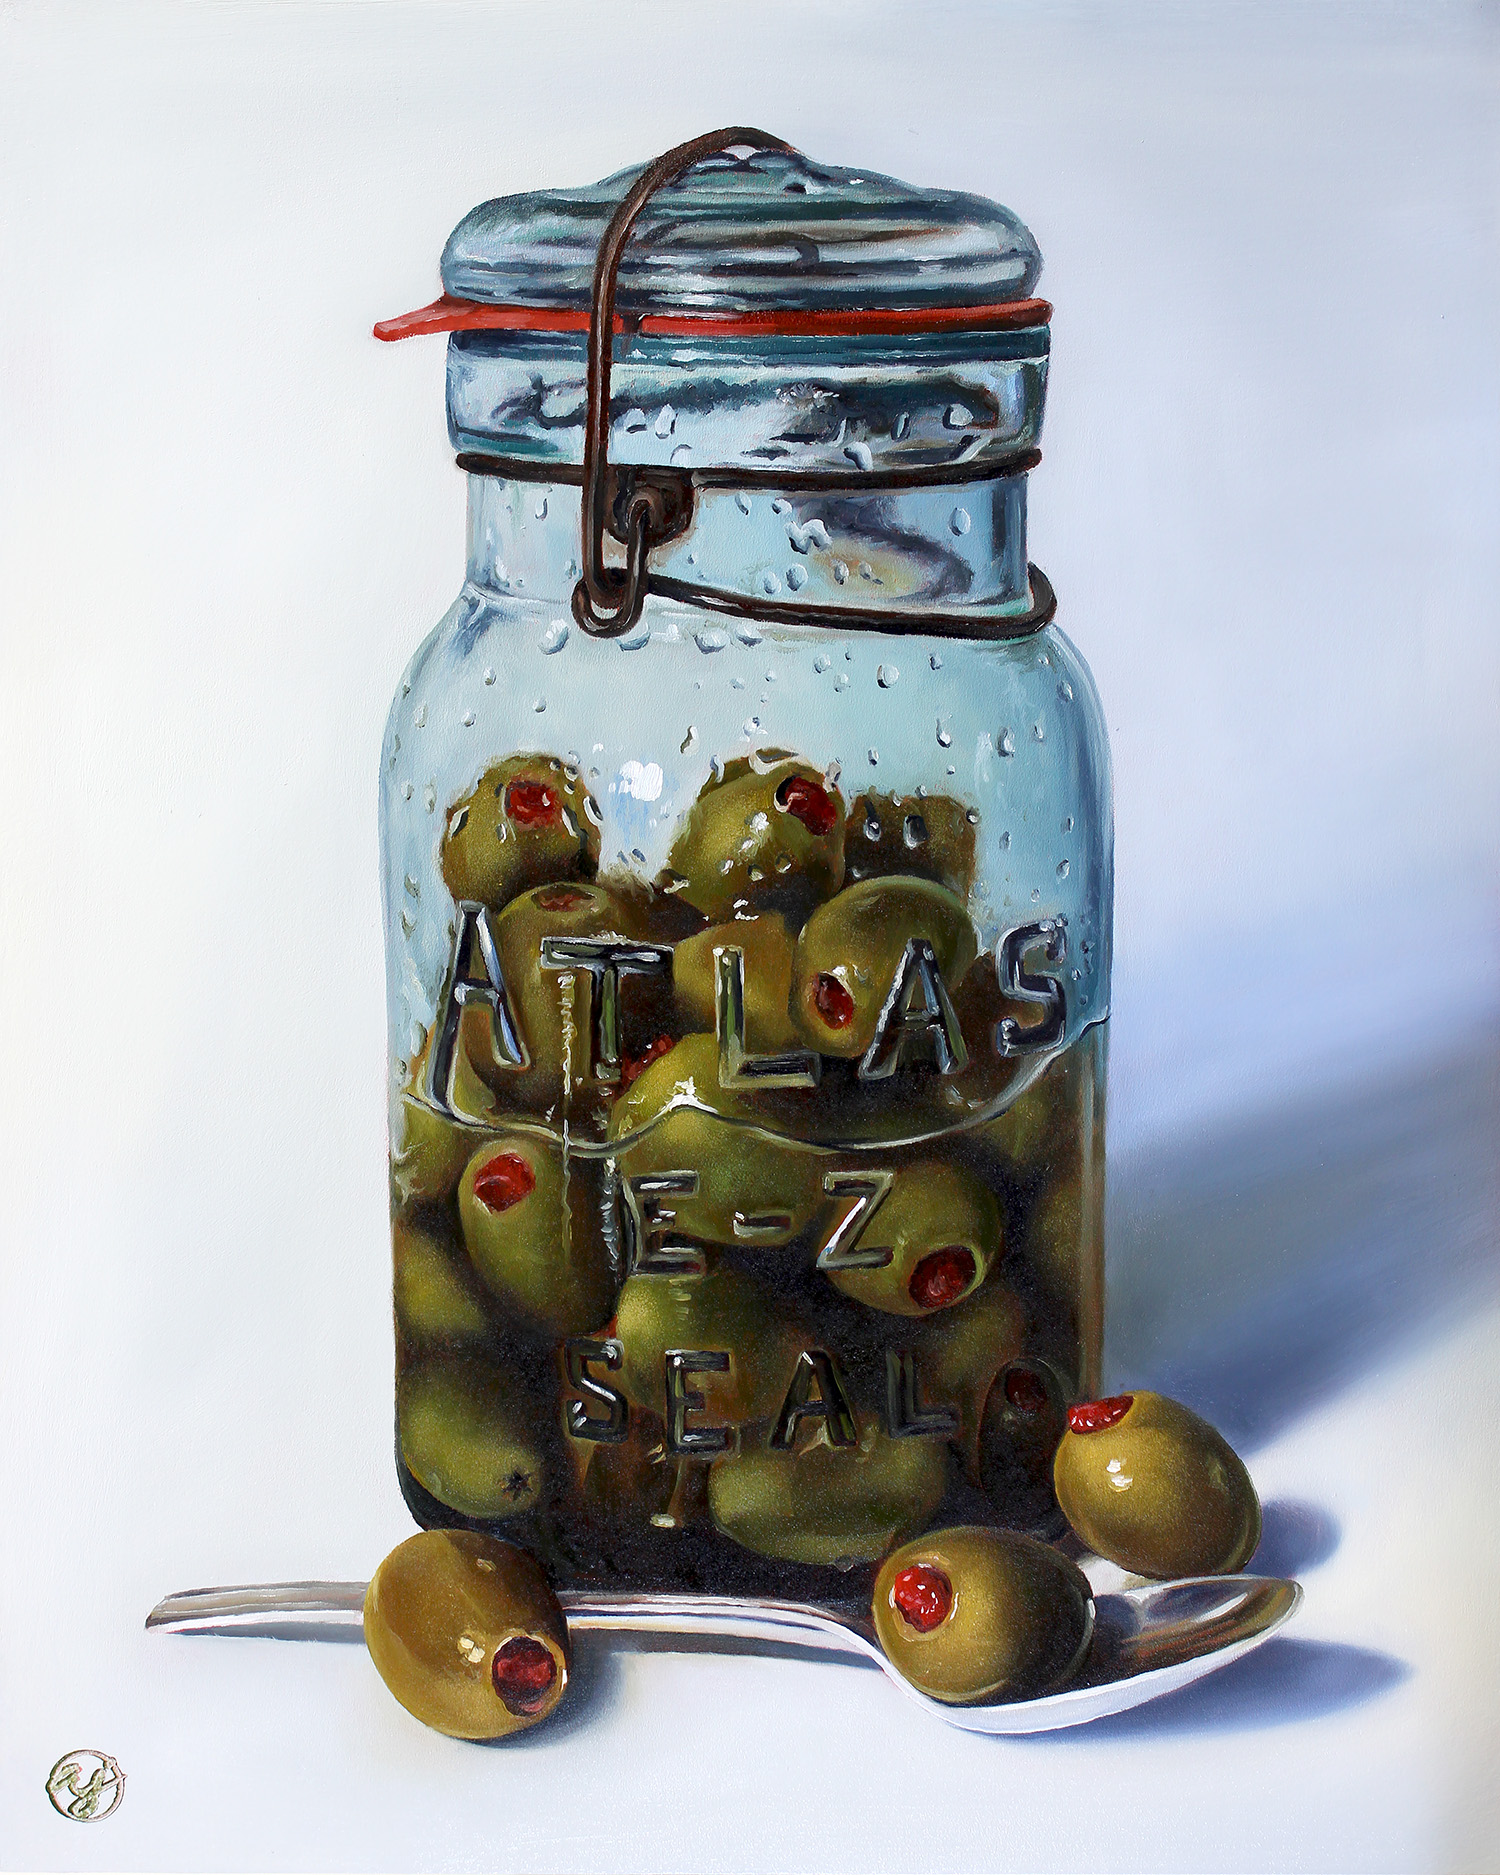 "Olive You" 16x20 Original Oil Painting by Abra Johnson